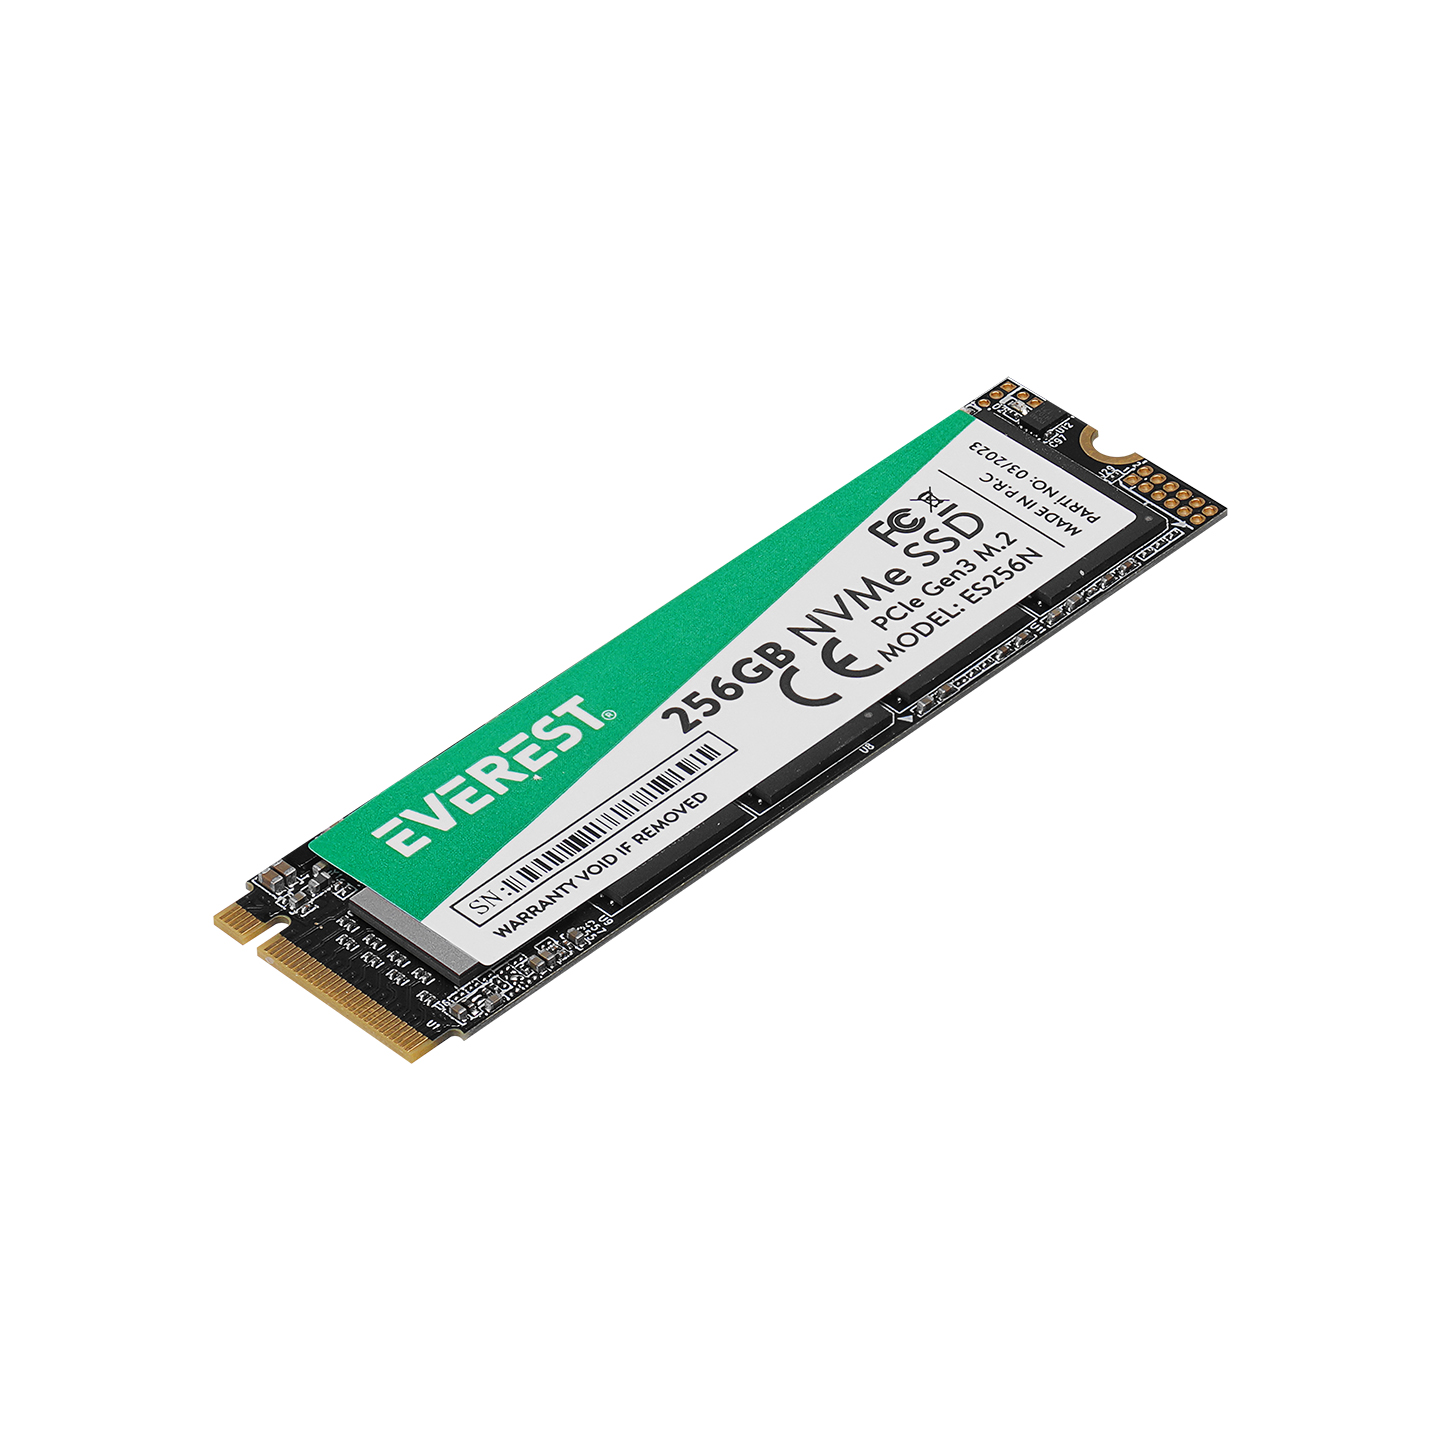 Everest ES256N 256GB 3D NAND Flash 2500MB/1800MB PCIe Gen3 NVMe M.2 SSD (Solid State Drive)